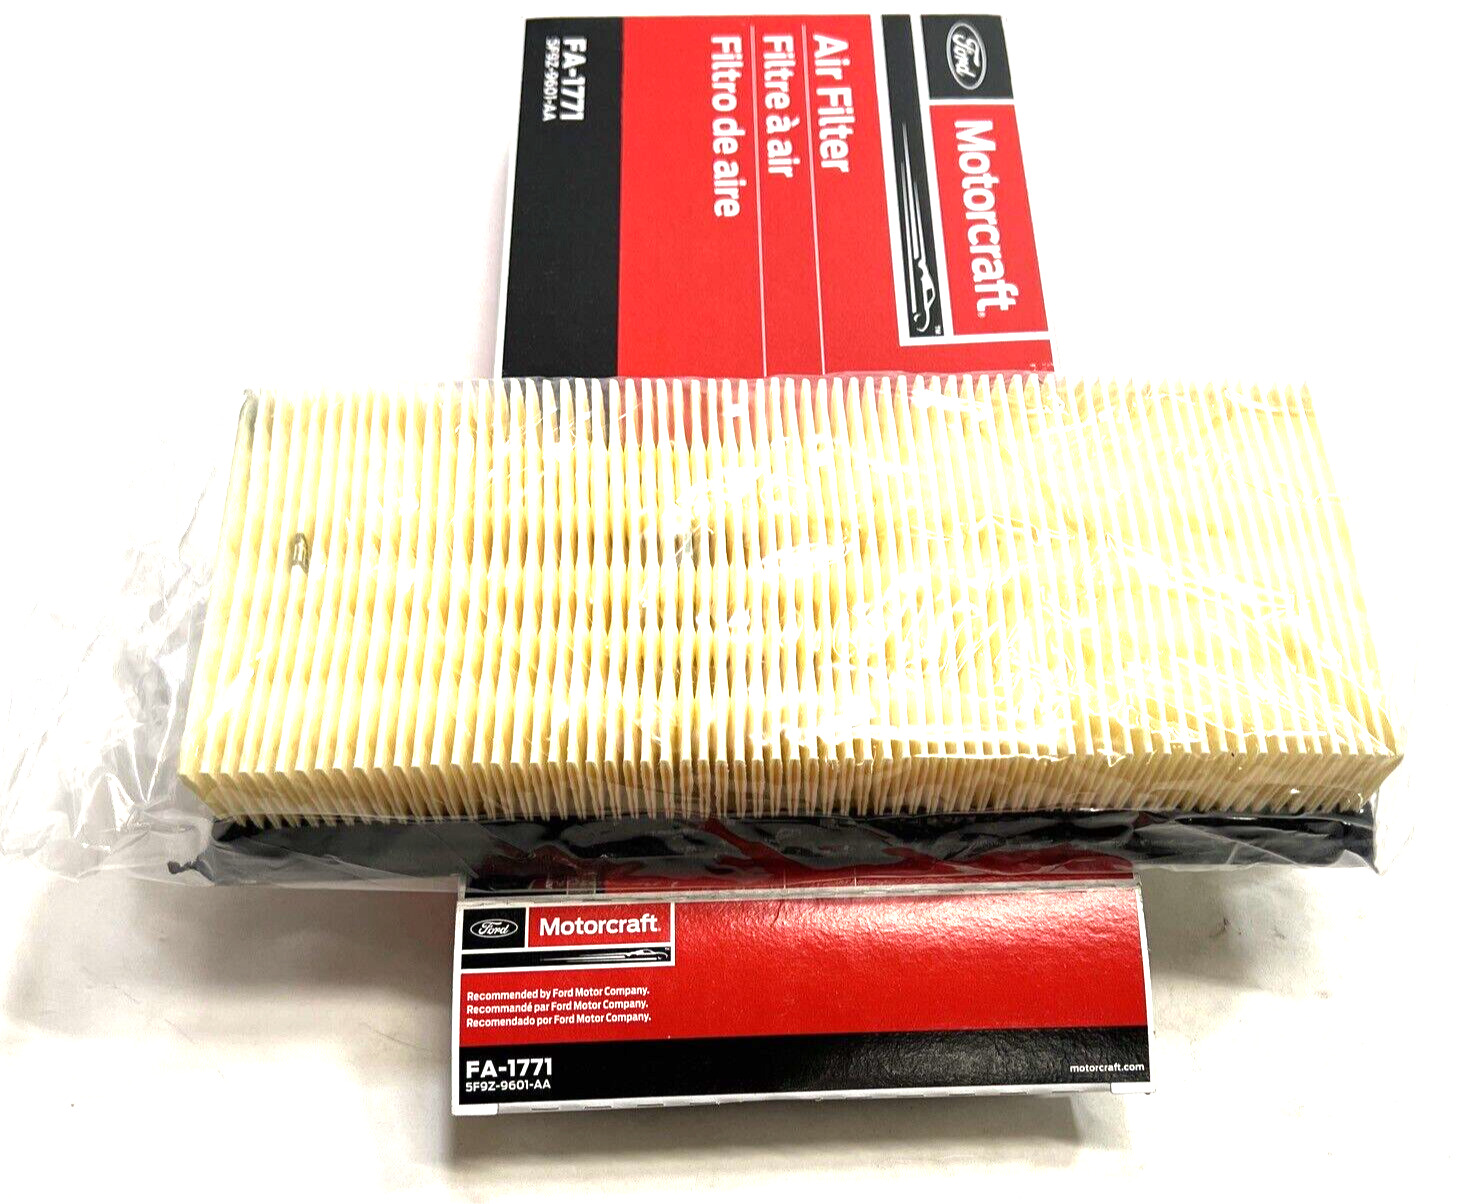 New OEM Genuine Ford Five Hundred 2005-2007 Air Filter Motorcraft FA1771